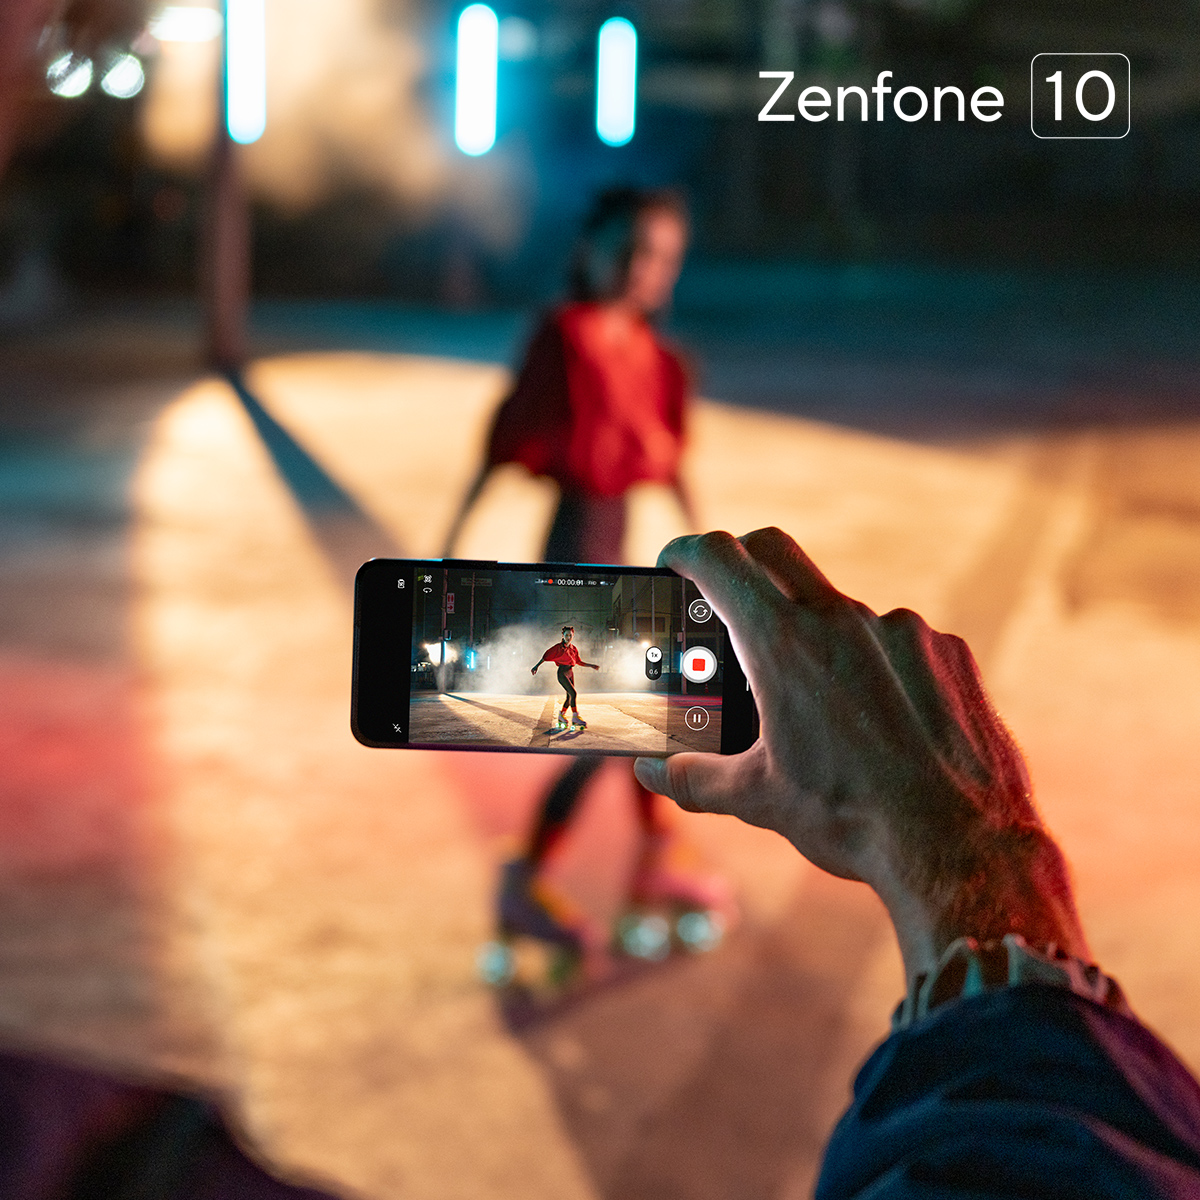 Achieve flawless handheld videography with Zenfone 10. Featuring adaptive EIS, it ensures remarkably smooth and stable footage even when you're recording on the move. Capture the moment with precision, all with just one hand. 

#ASUS #Zenfone10 #MIGHTYONHAND